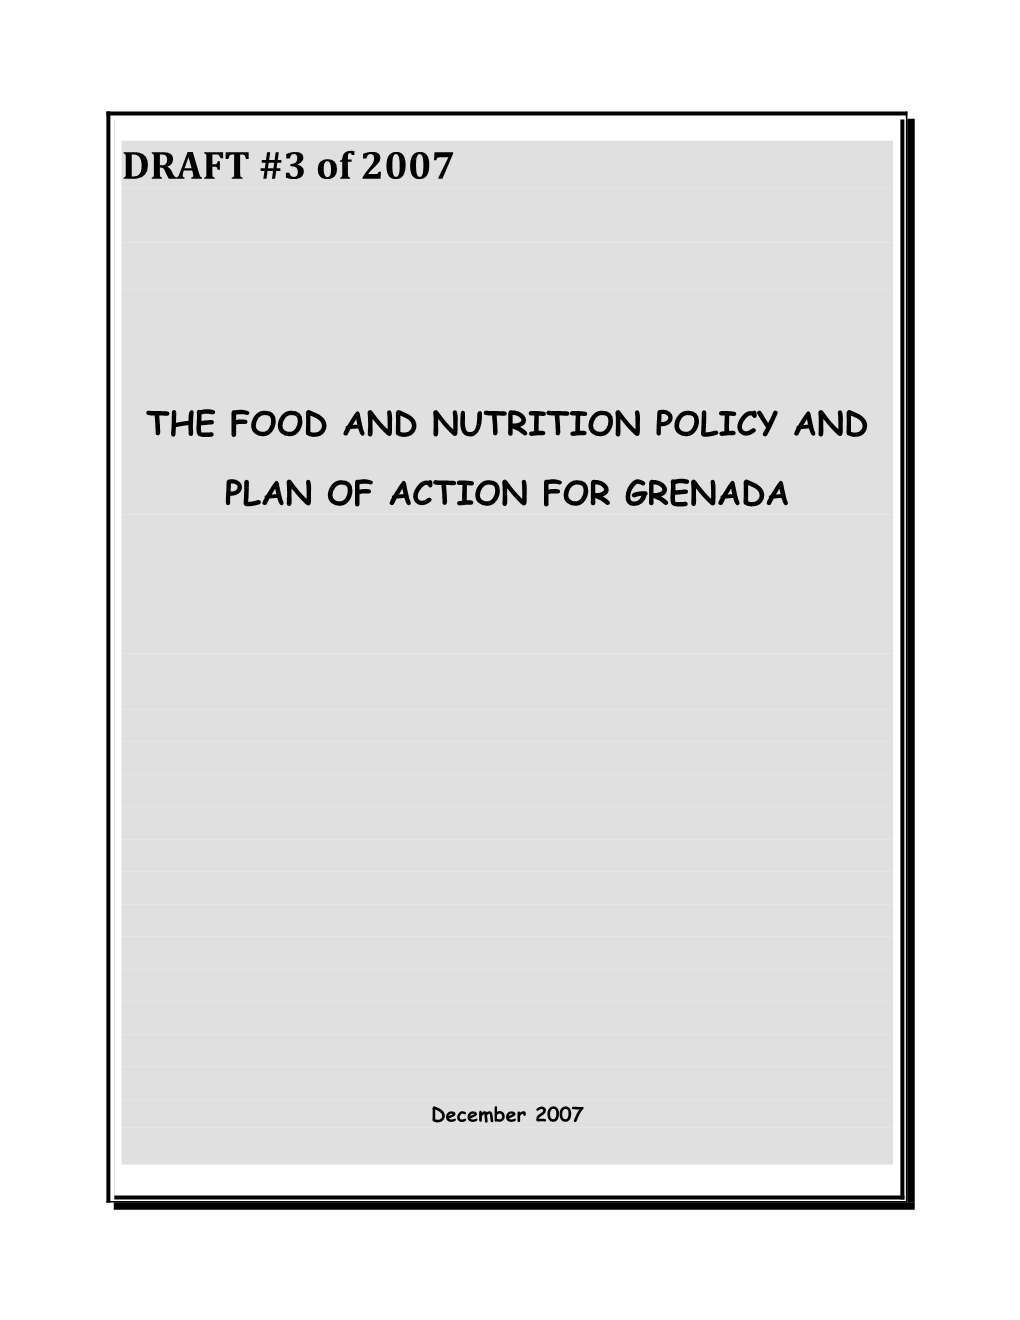 Food and Nutrition Policy from Grenada Government 2007